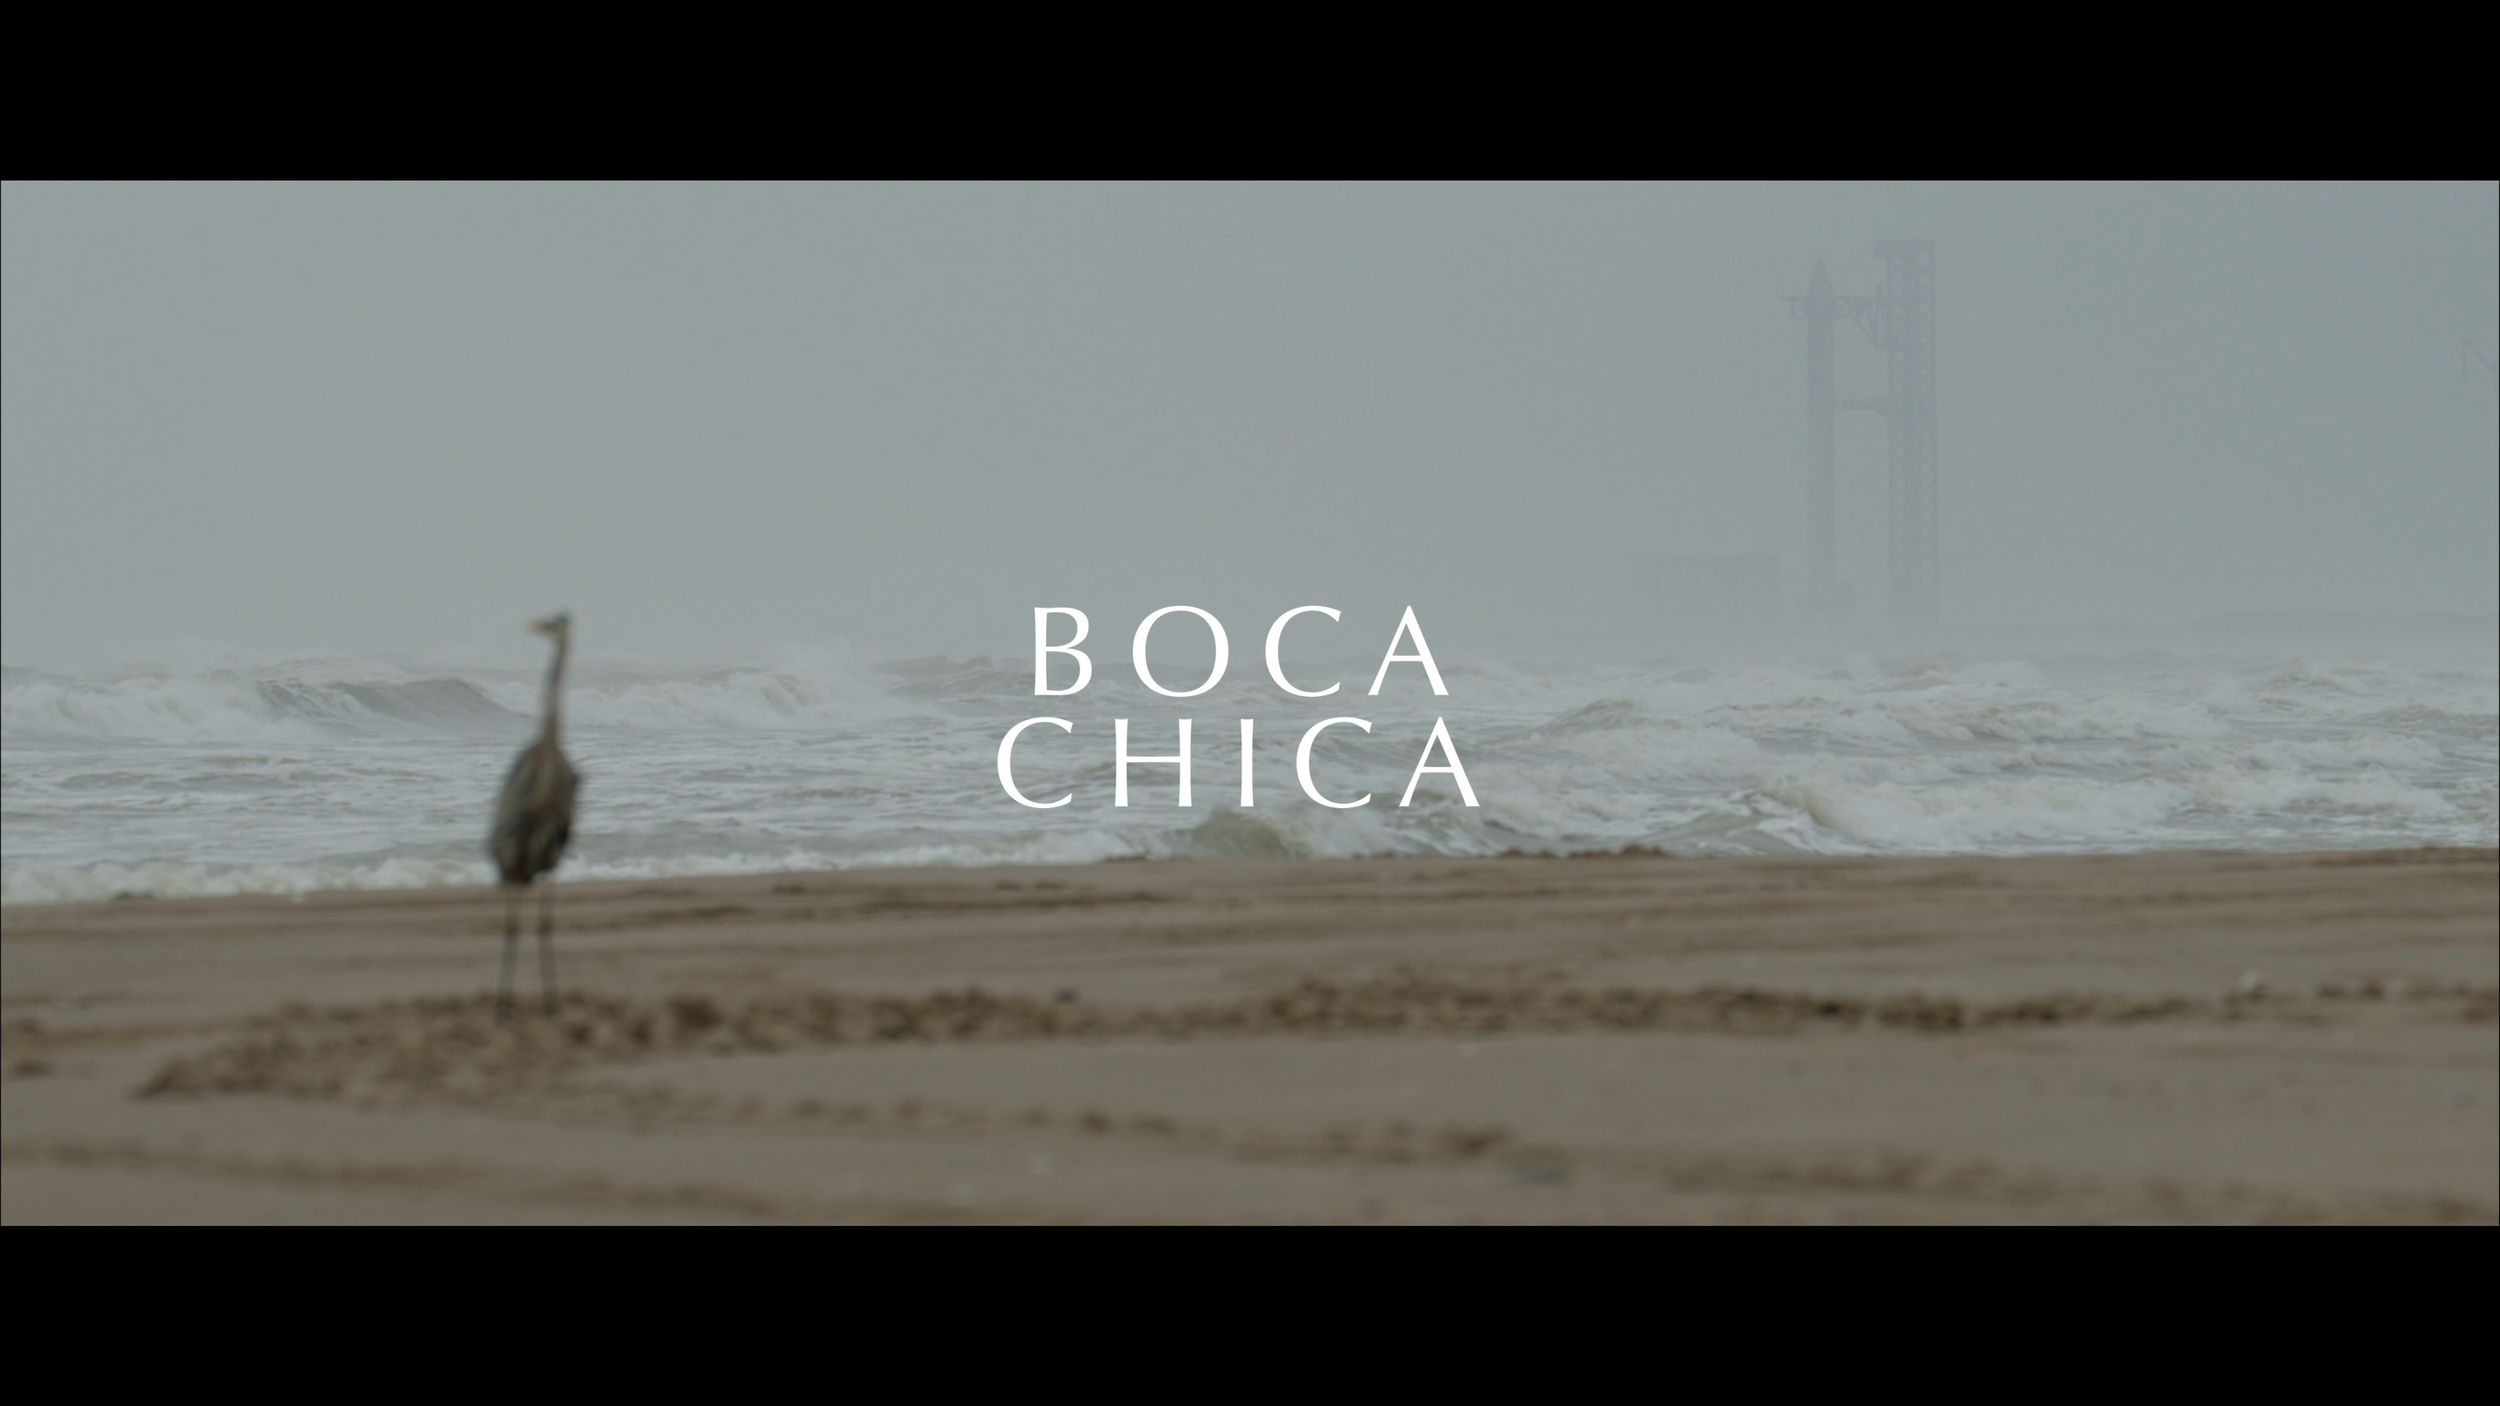 Boca Chica Images1.png